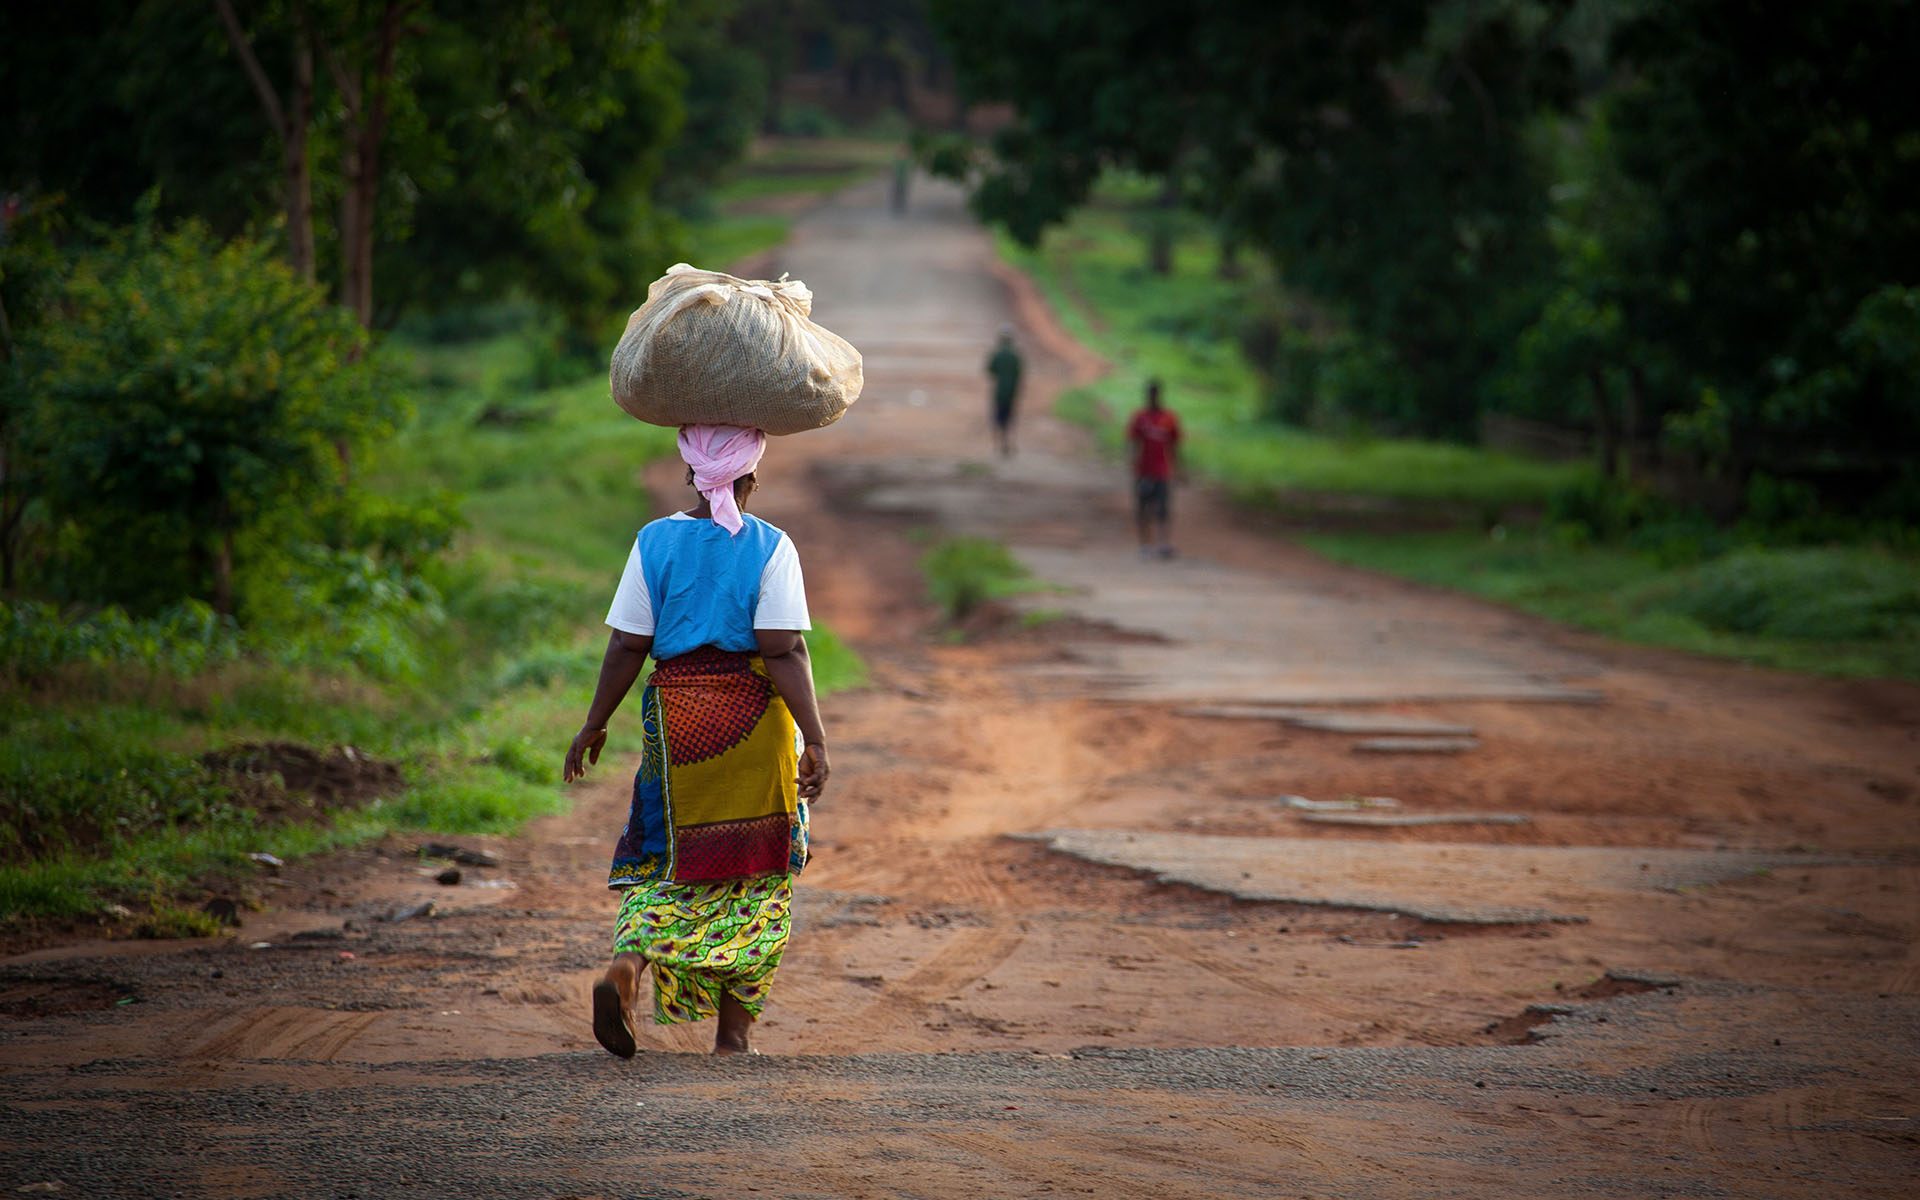 woman in traditional African garb walks down dirt road, a parcel balanced upon her head